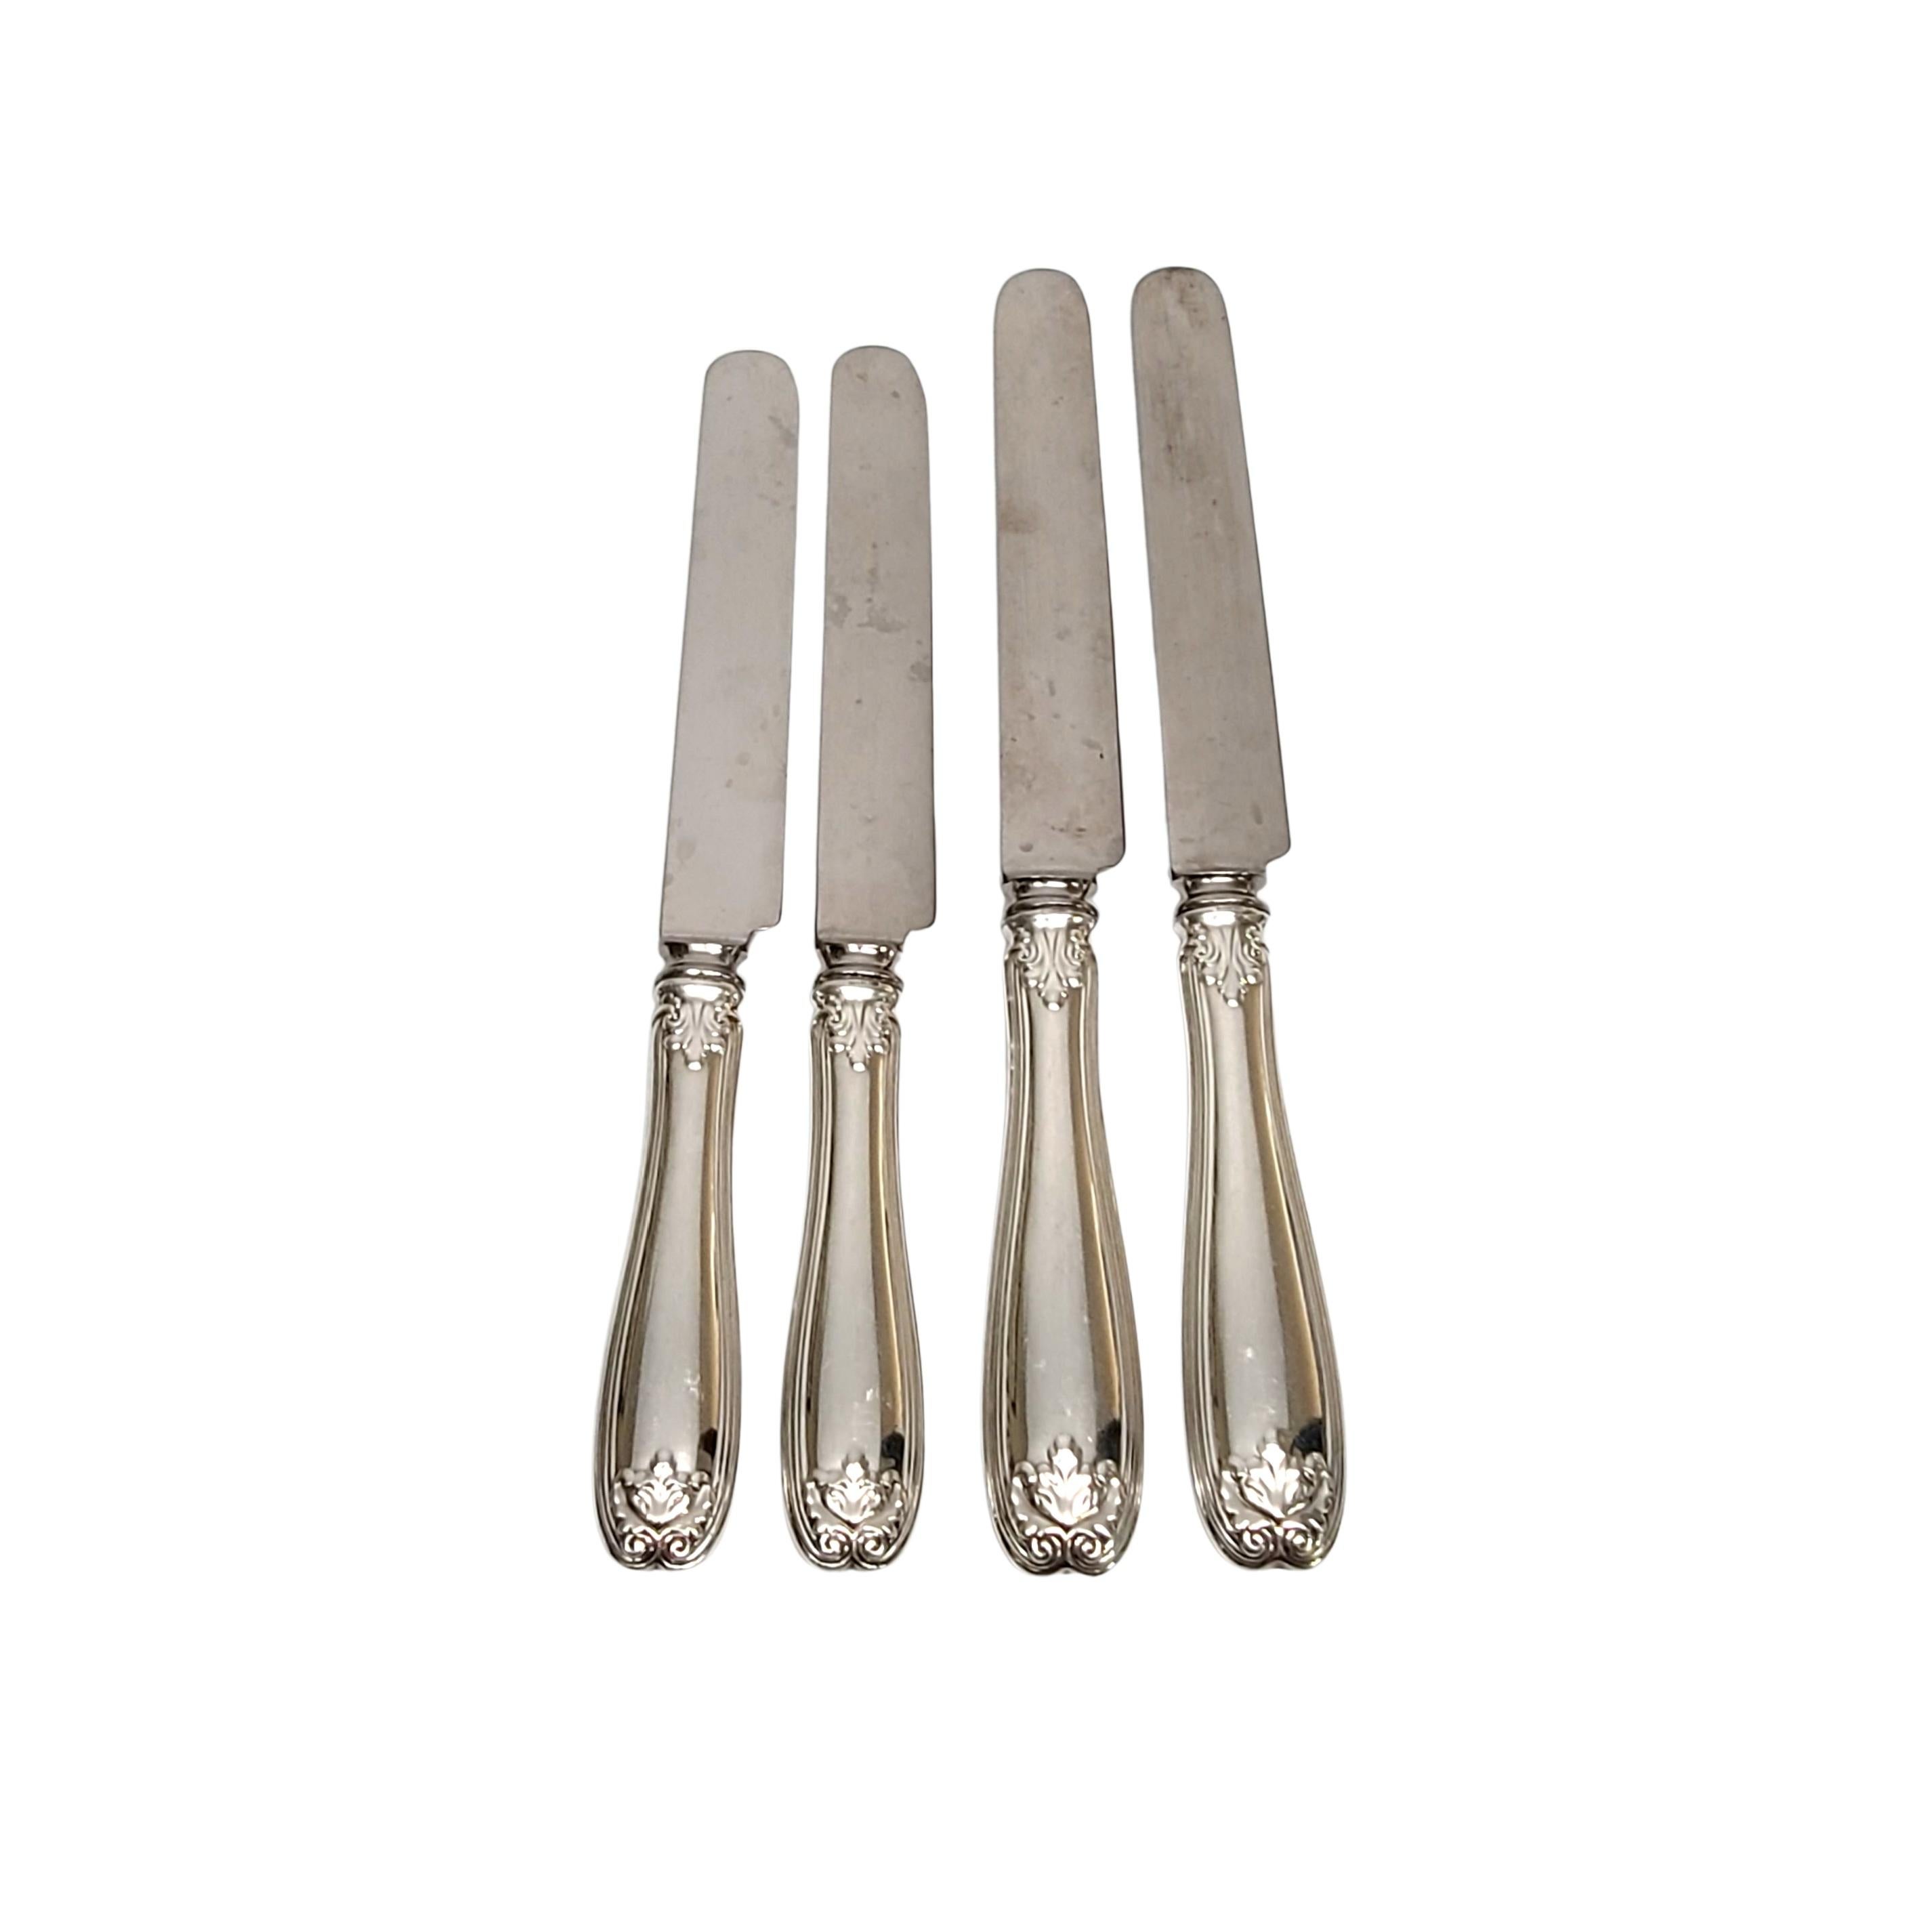 Set of 4 sterling silver knives by Tiffany & Co in the Colonial pattern.

Monogram appears to be McK

Set of 4 knives includes 2 larger knives and 2 smaller knives in the Colonial pattern, designed by Paulding Farnham in 1895, features a simple